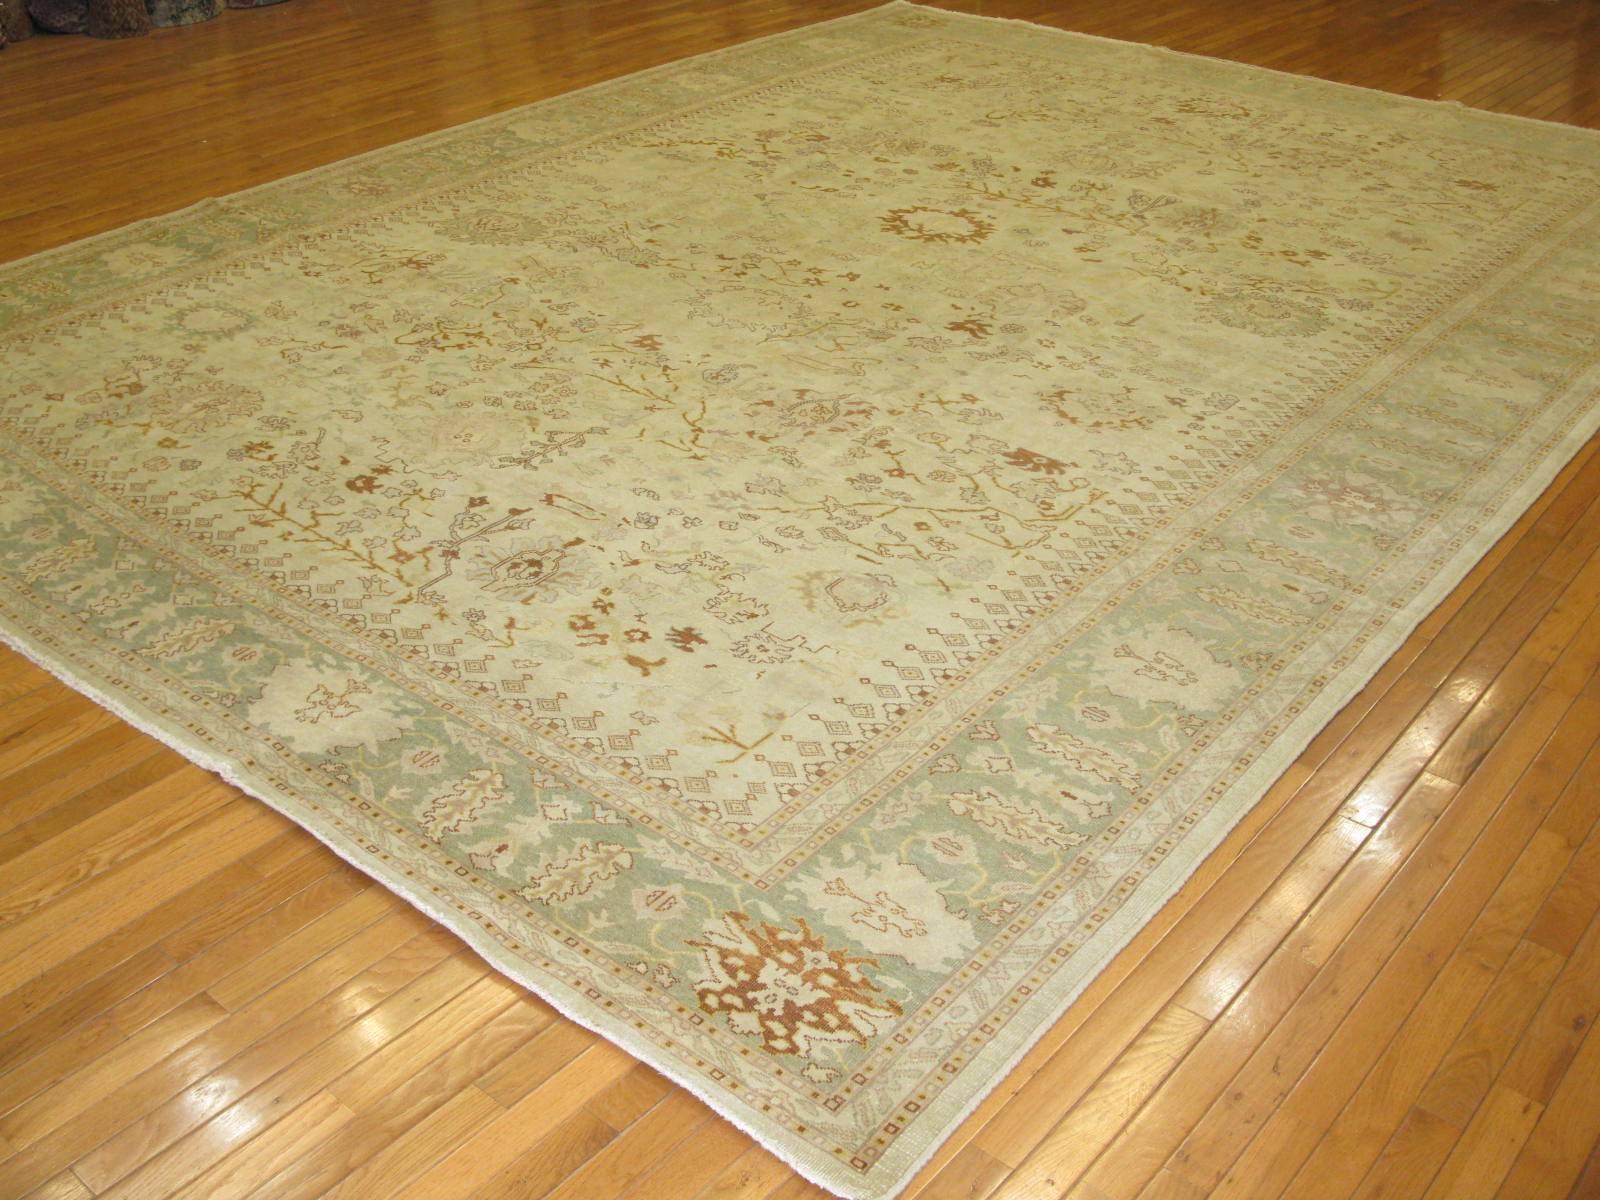 Wool Antique Look Hand-Knotted Agra Design Rug